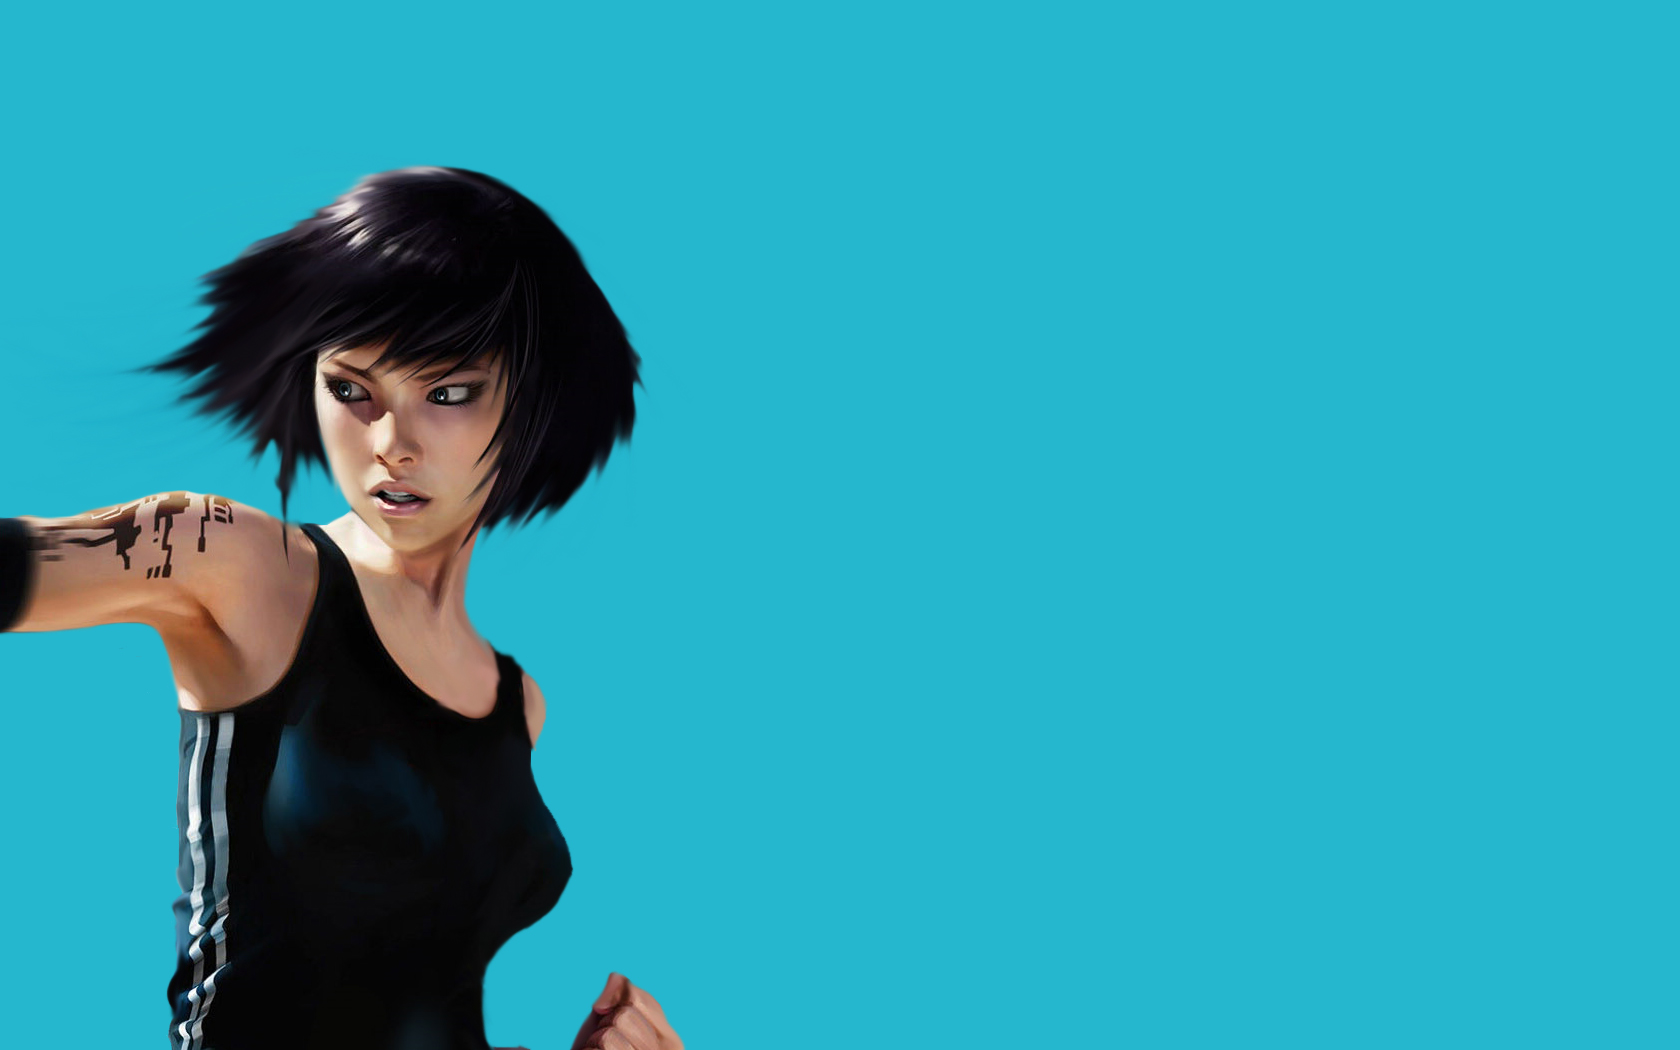 1920x1080 mirrors edge download wallpapers for pc  Fondos de escritorio  Fondos de pantalla Fondos de pantalla hd